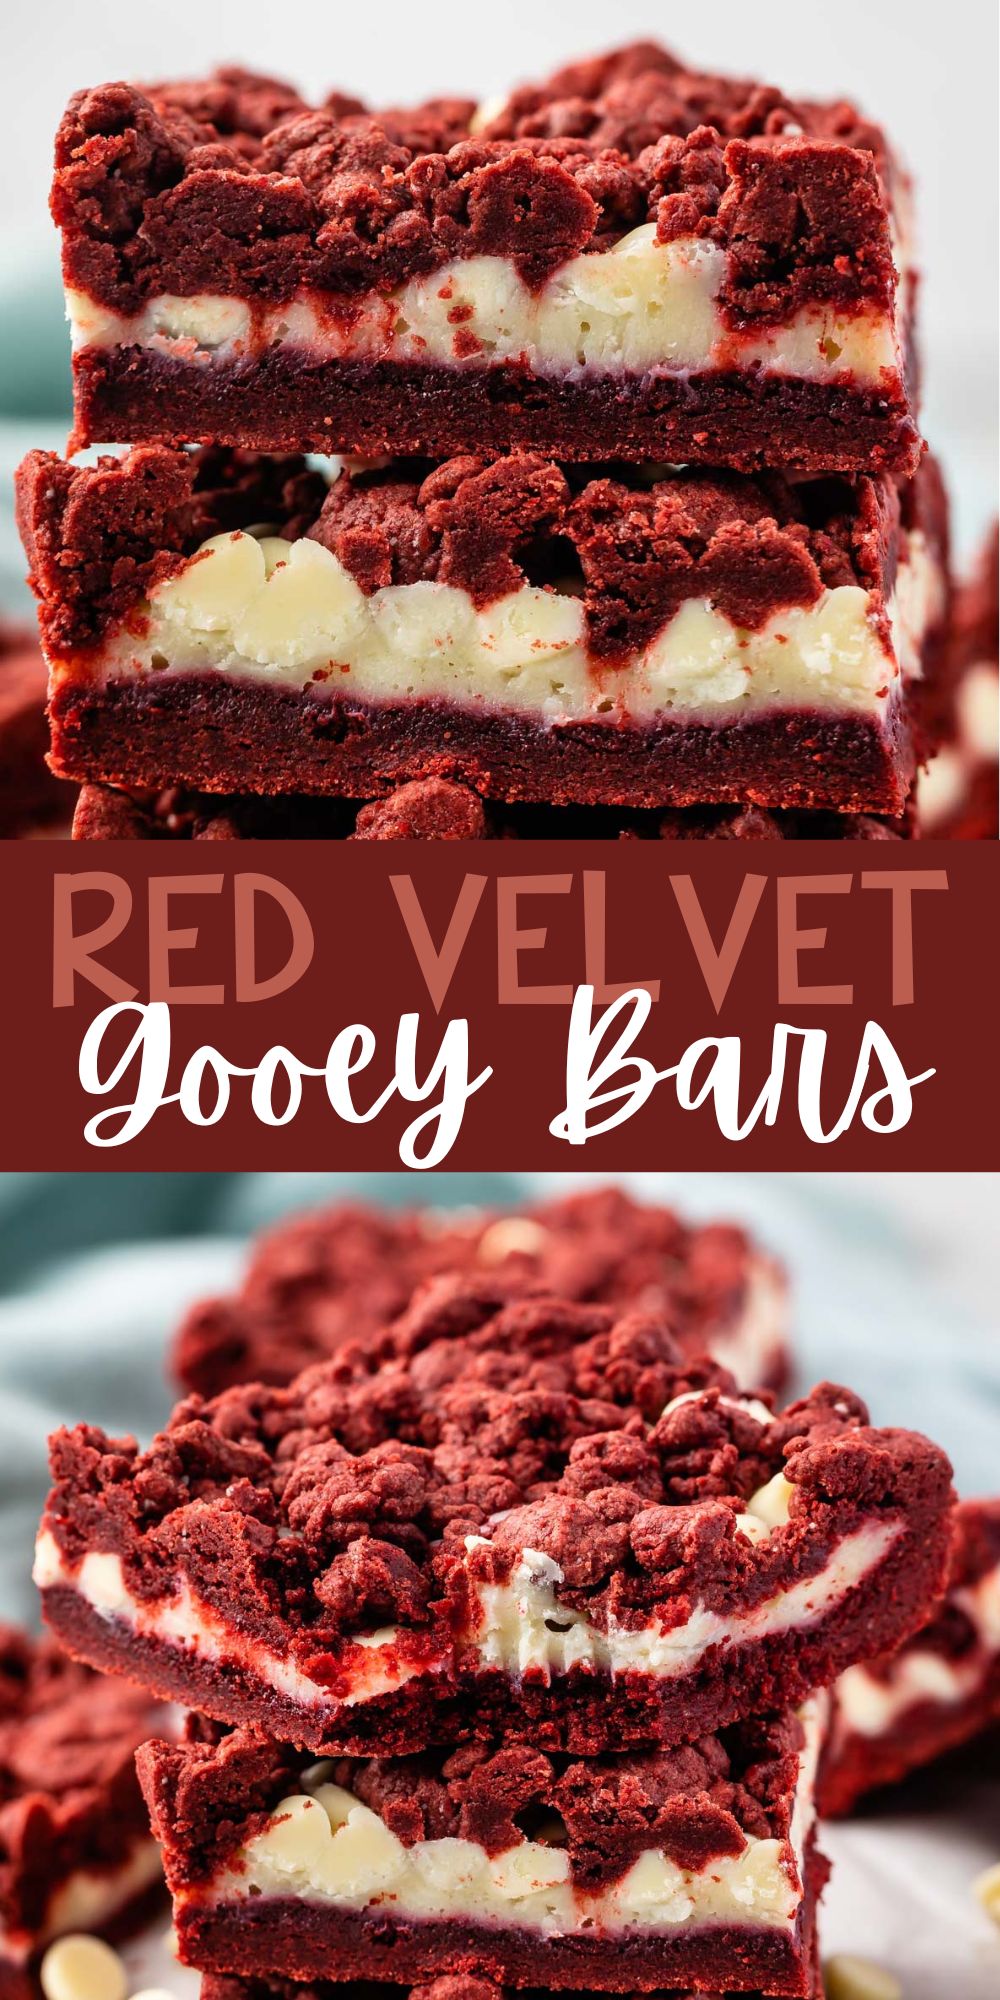 two photos of stacked red velvet gooey bars with white chocolate chips sprinkled around with words on the image.